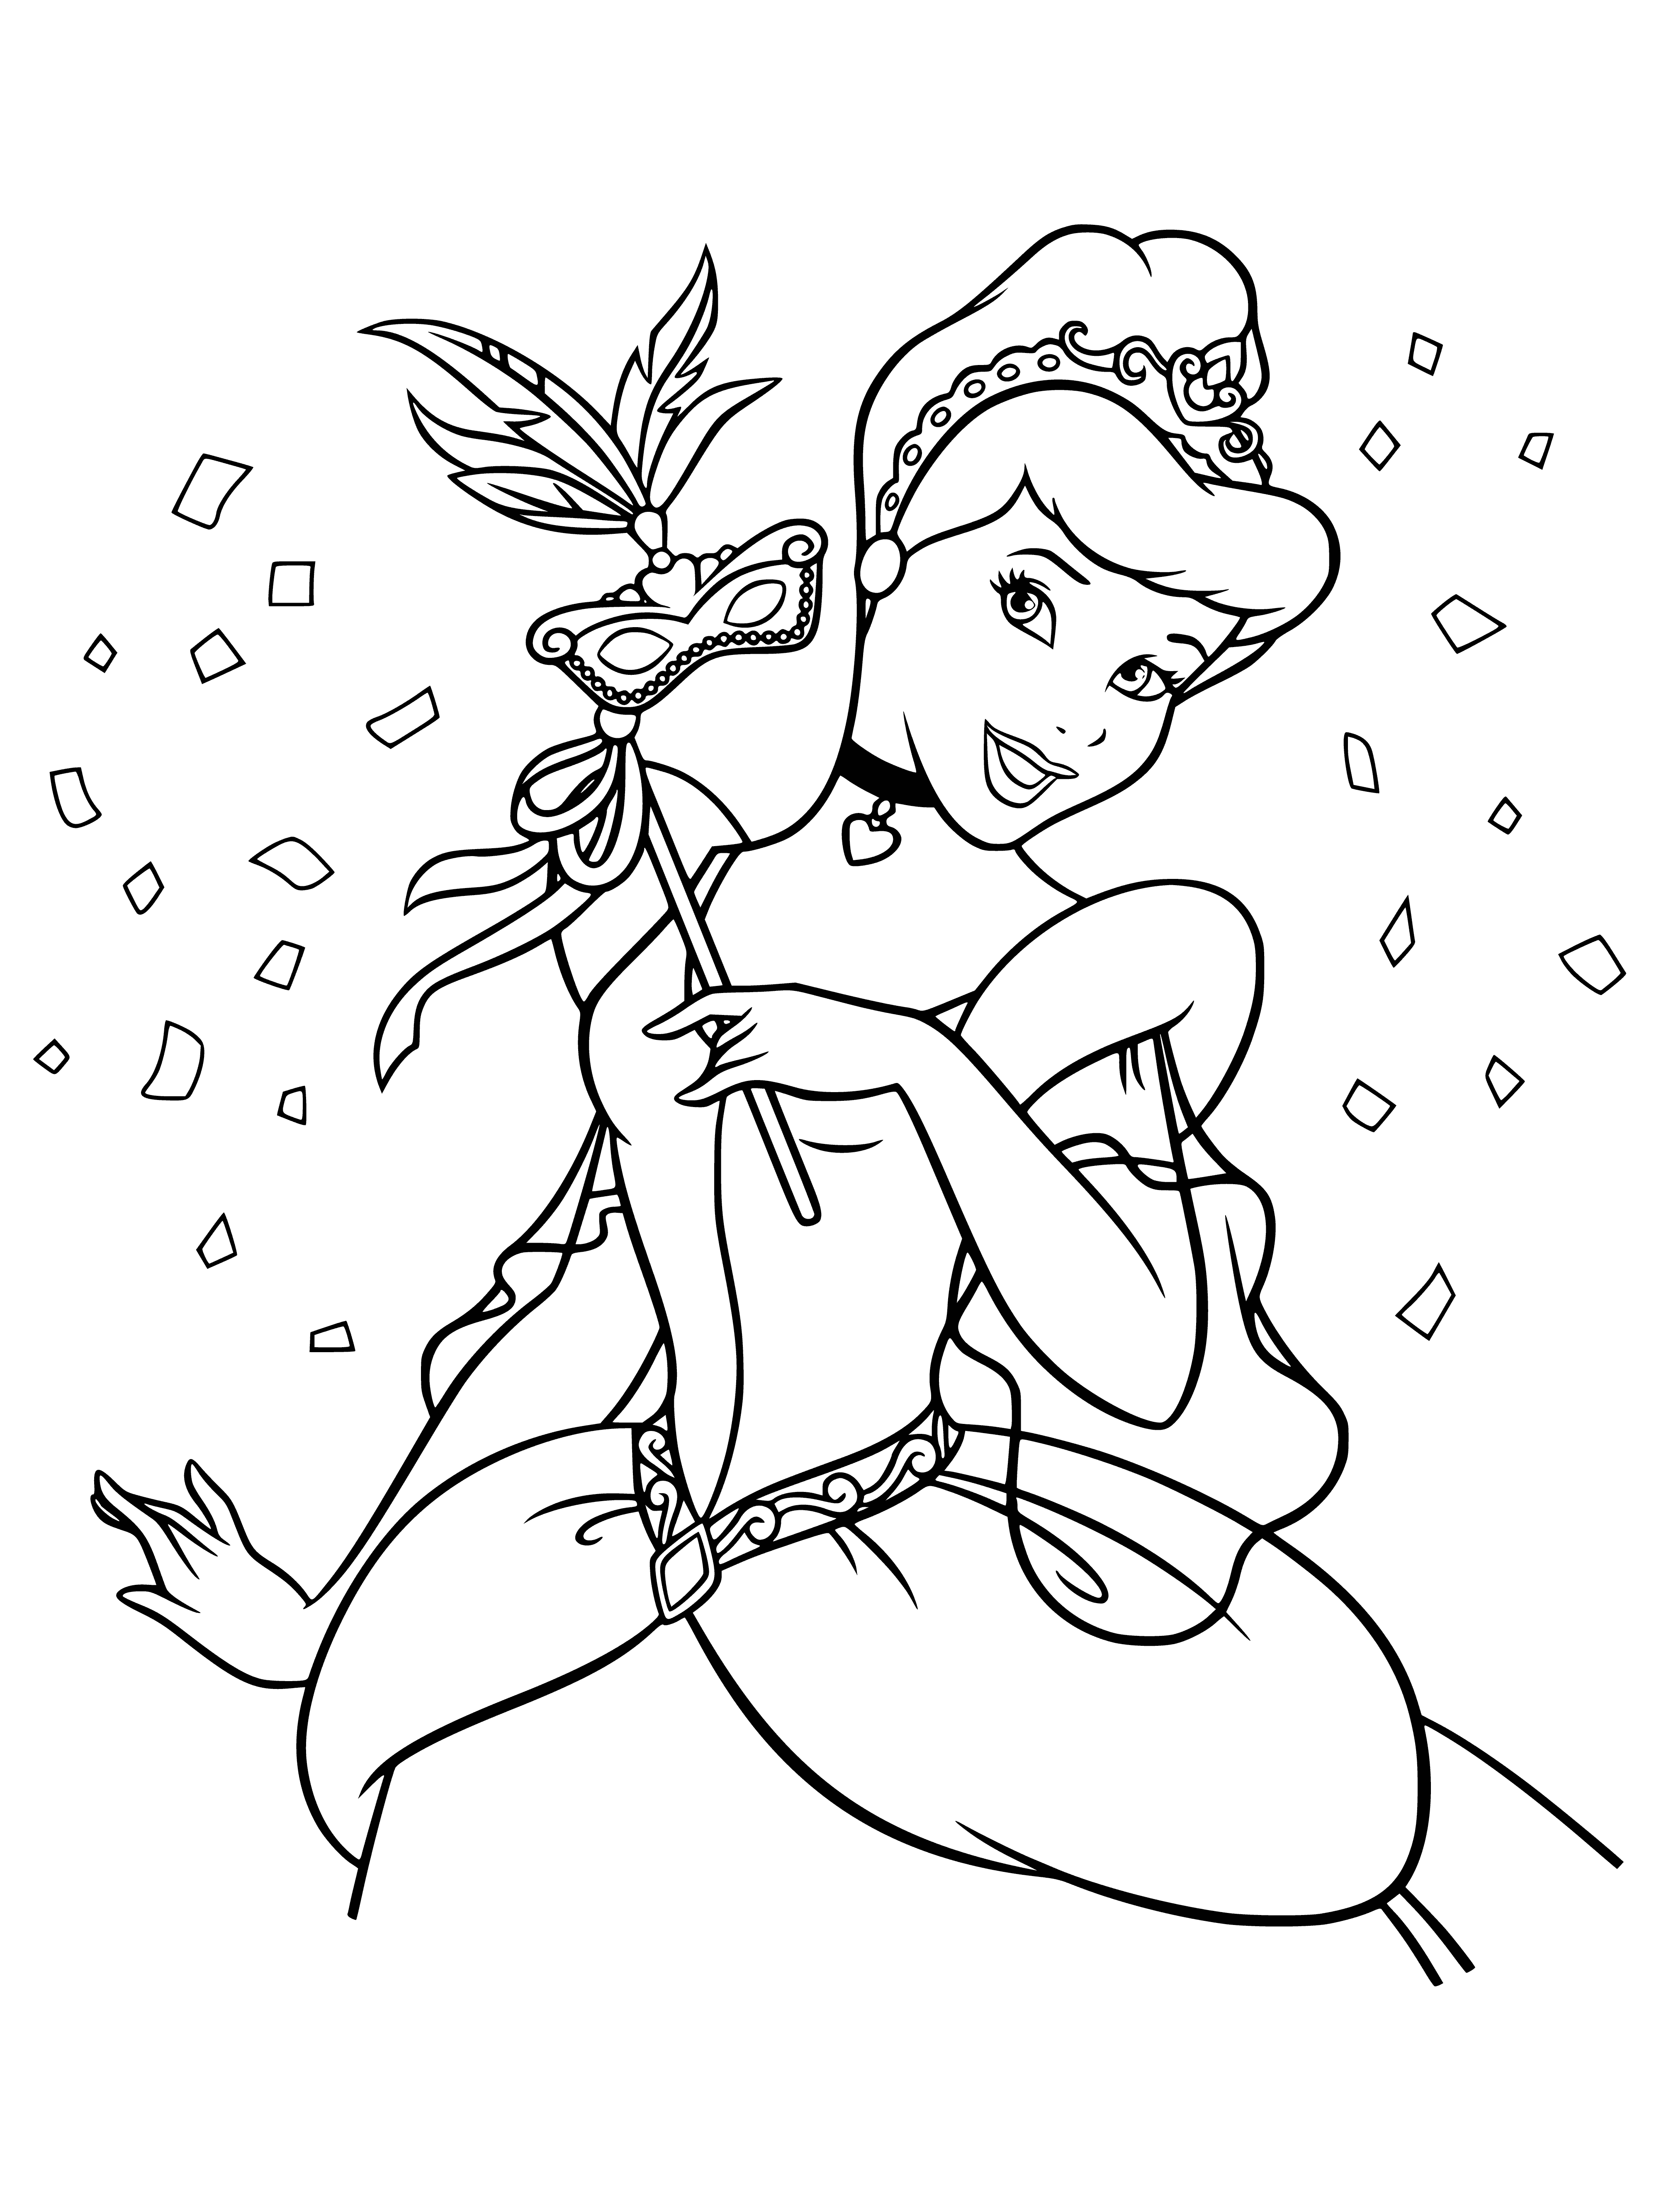 Cinderella with a mask coloring page